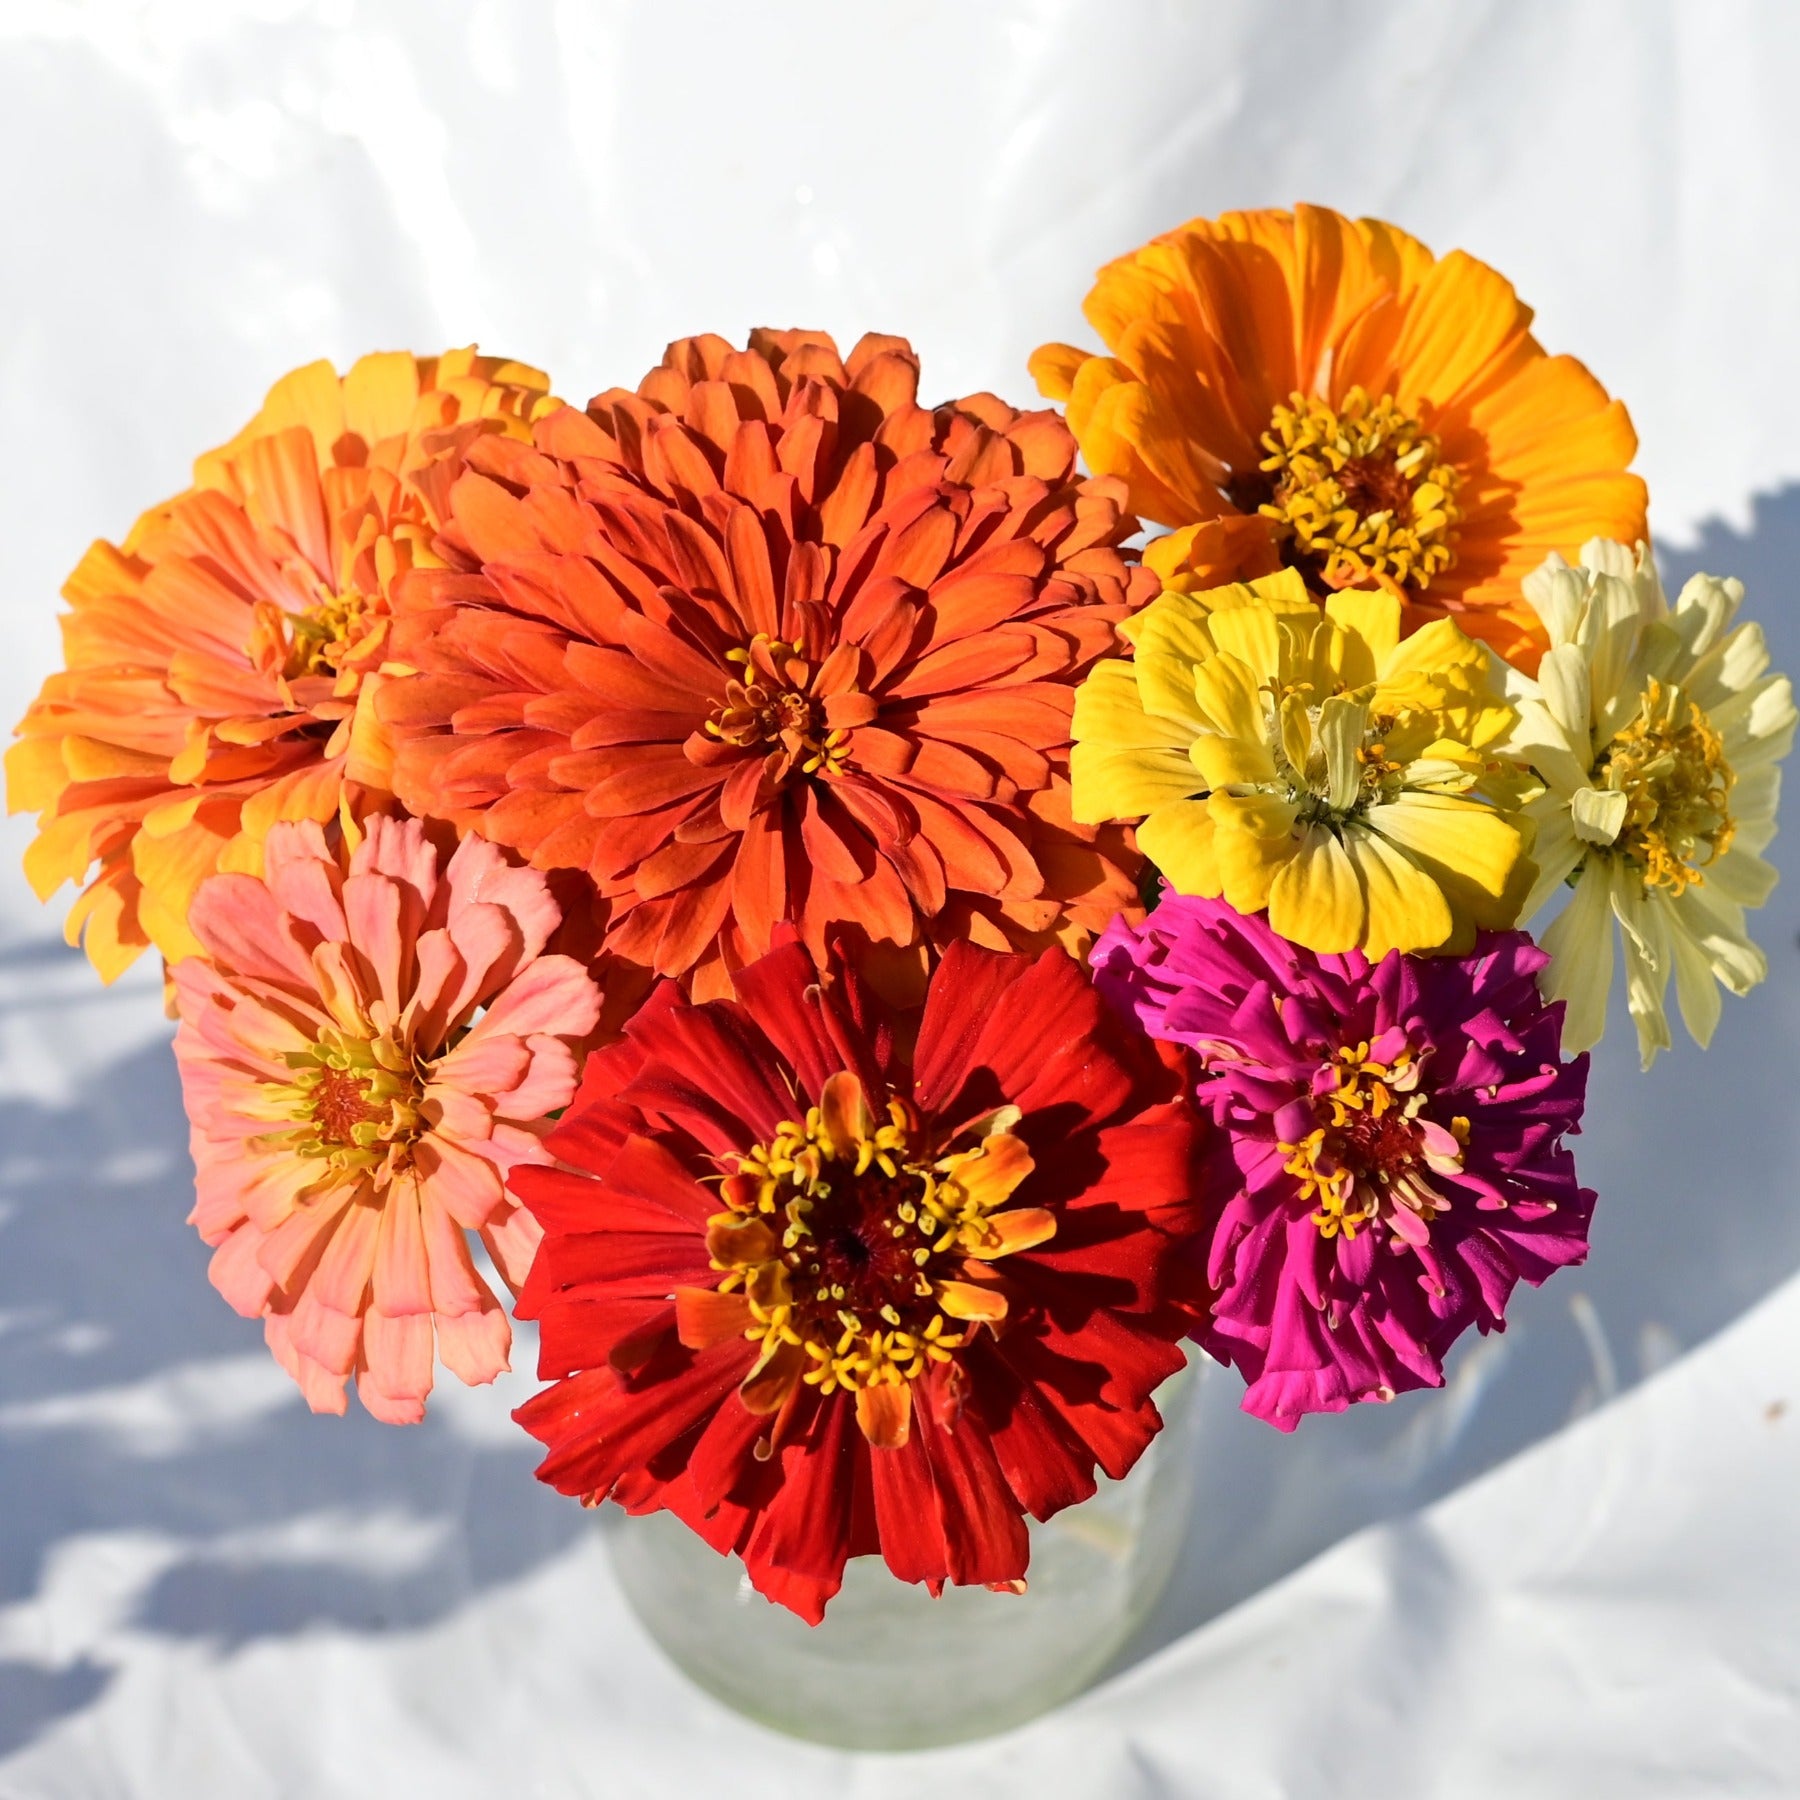 Jim Bagget Zinnia Mix in a vase with coral, orange, red, pink, yellow, and purple blooms